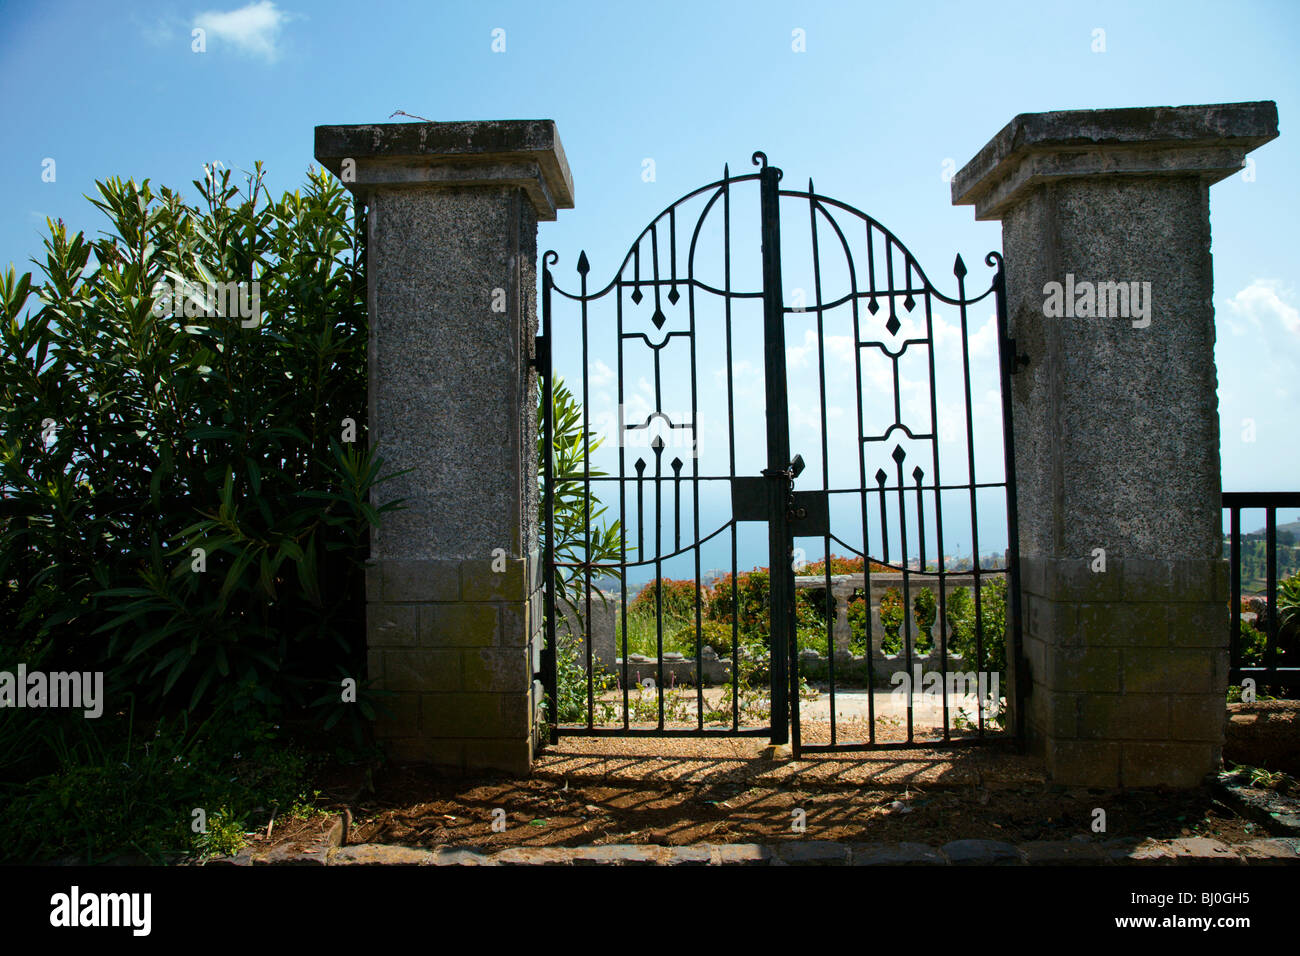 A Gated Entrance in Madeira Stock Photo